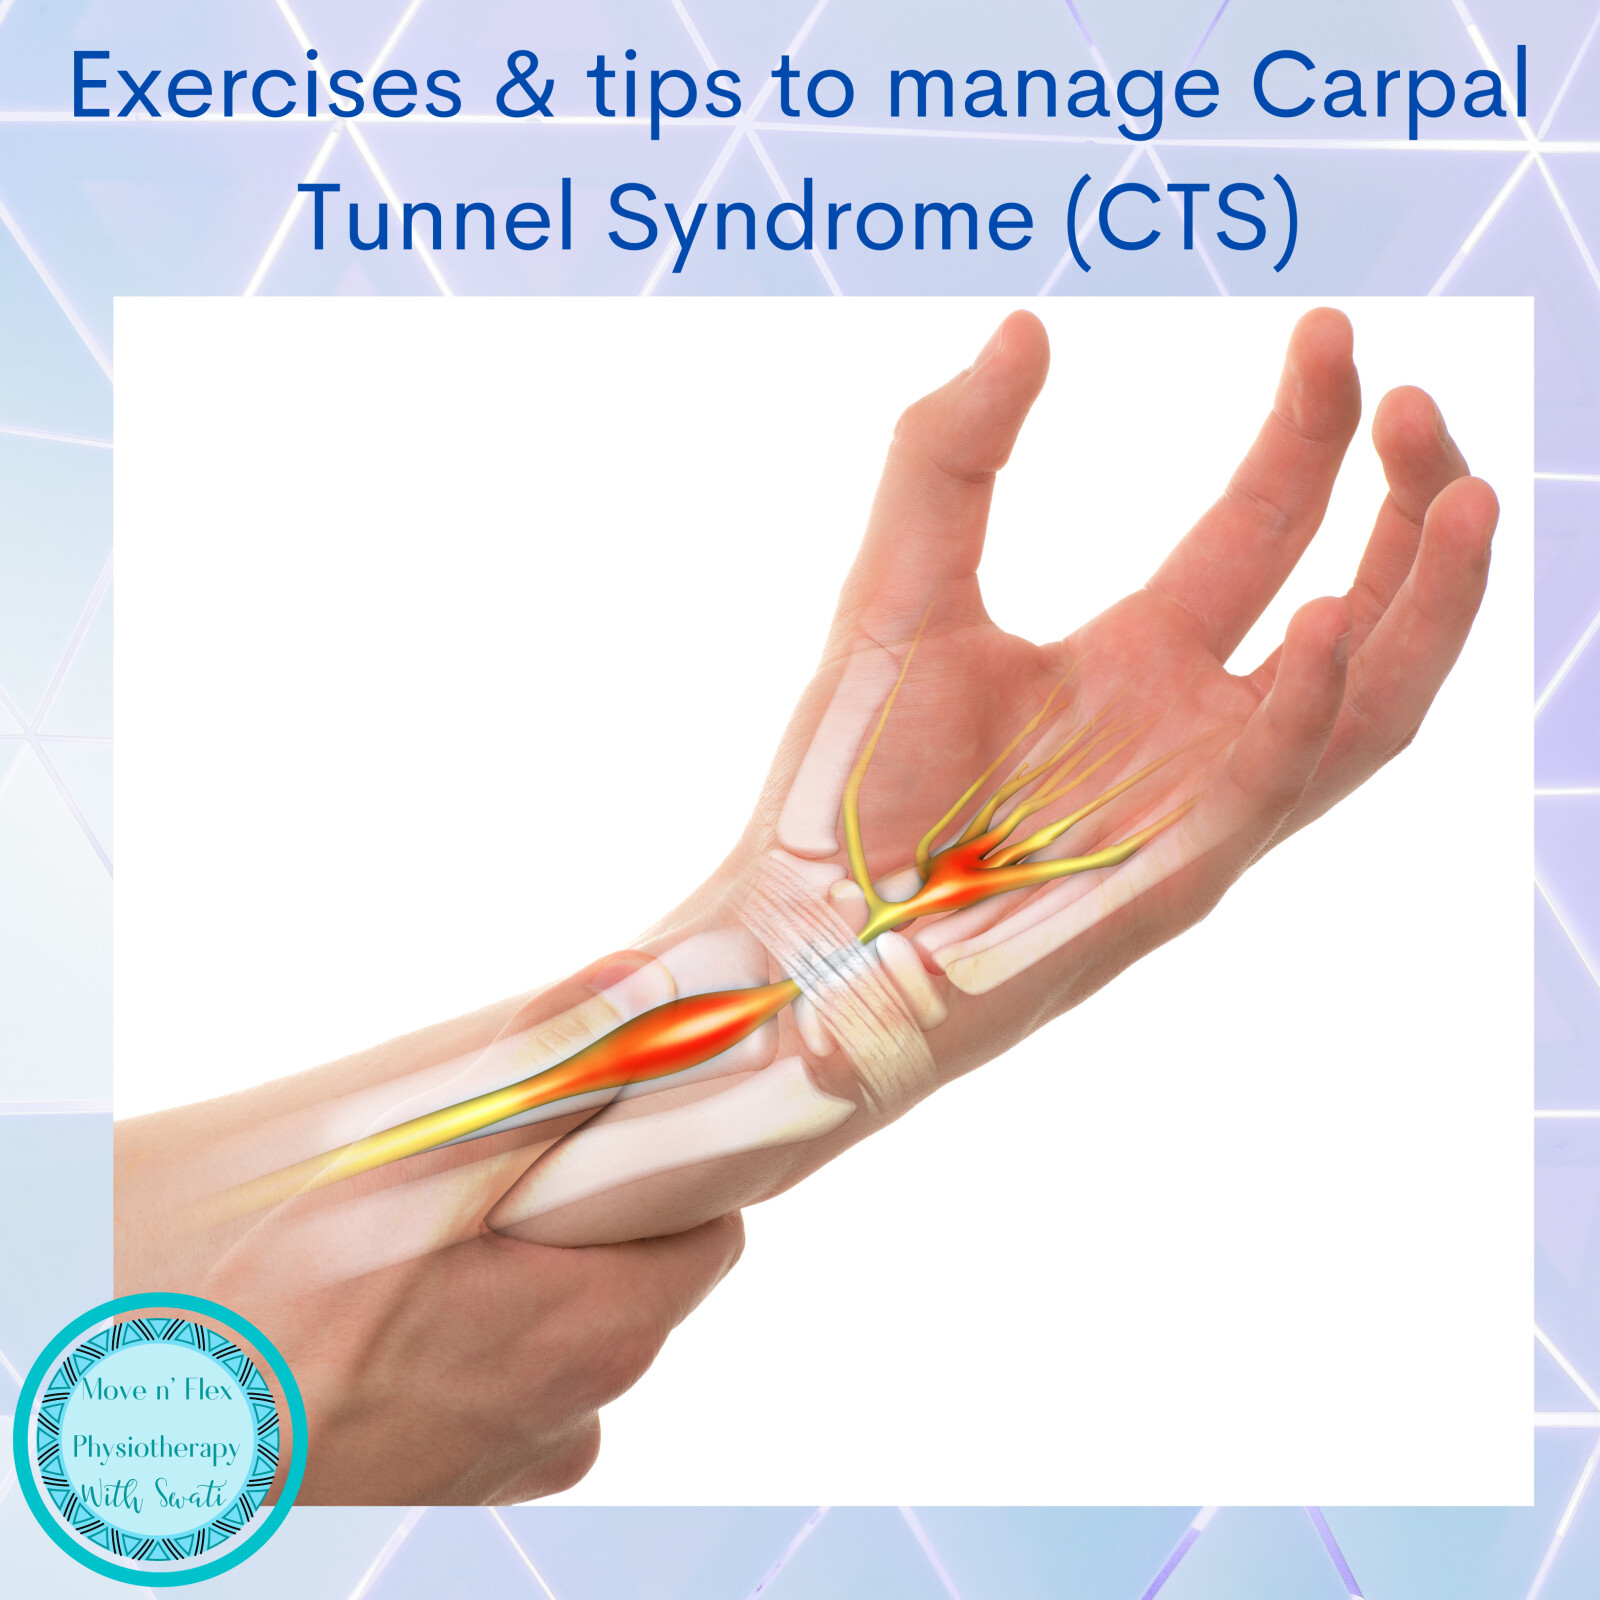 Easy exercises to manage Carpal Tunnel Syndrome and some useful tips to manage it